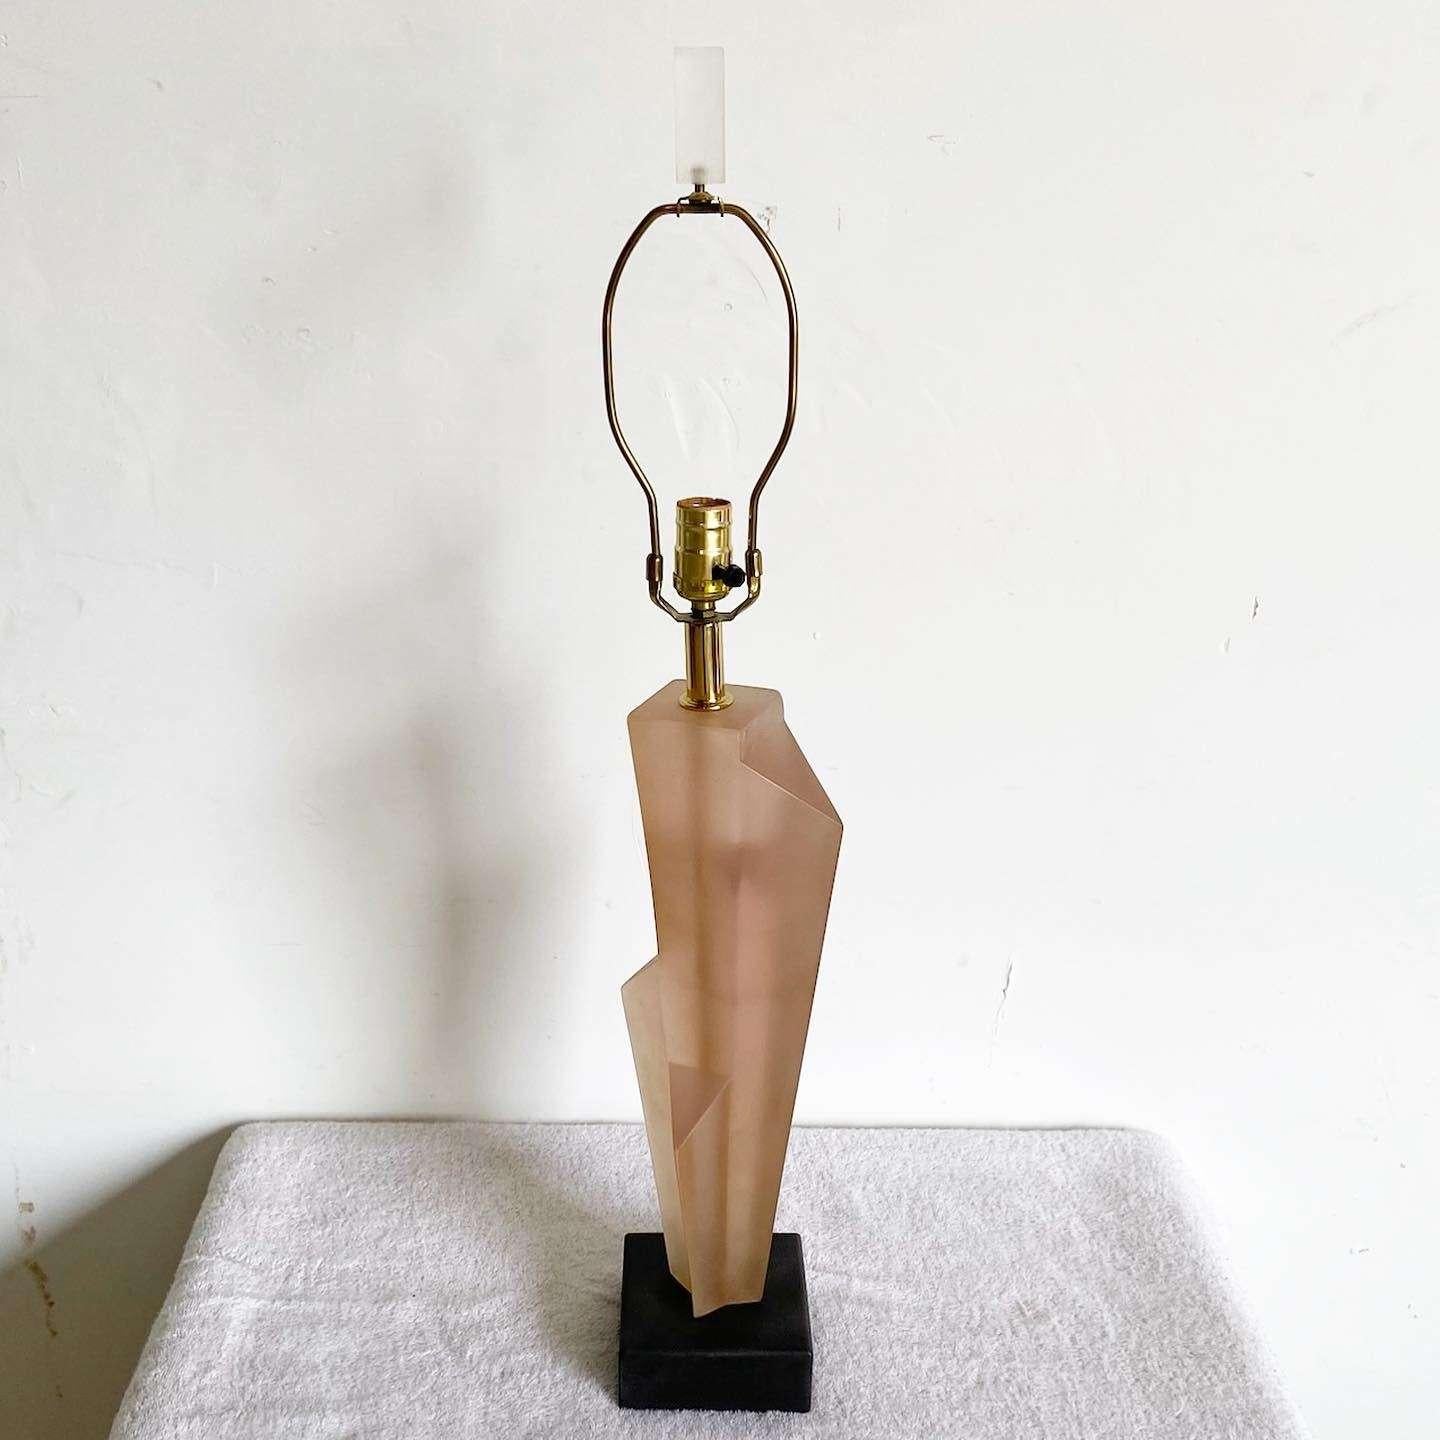 Exceptional 1980s art deco revival sculpted table lamp by Paolo Gucci. Features a pink resin body on a back square base.